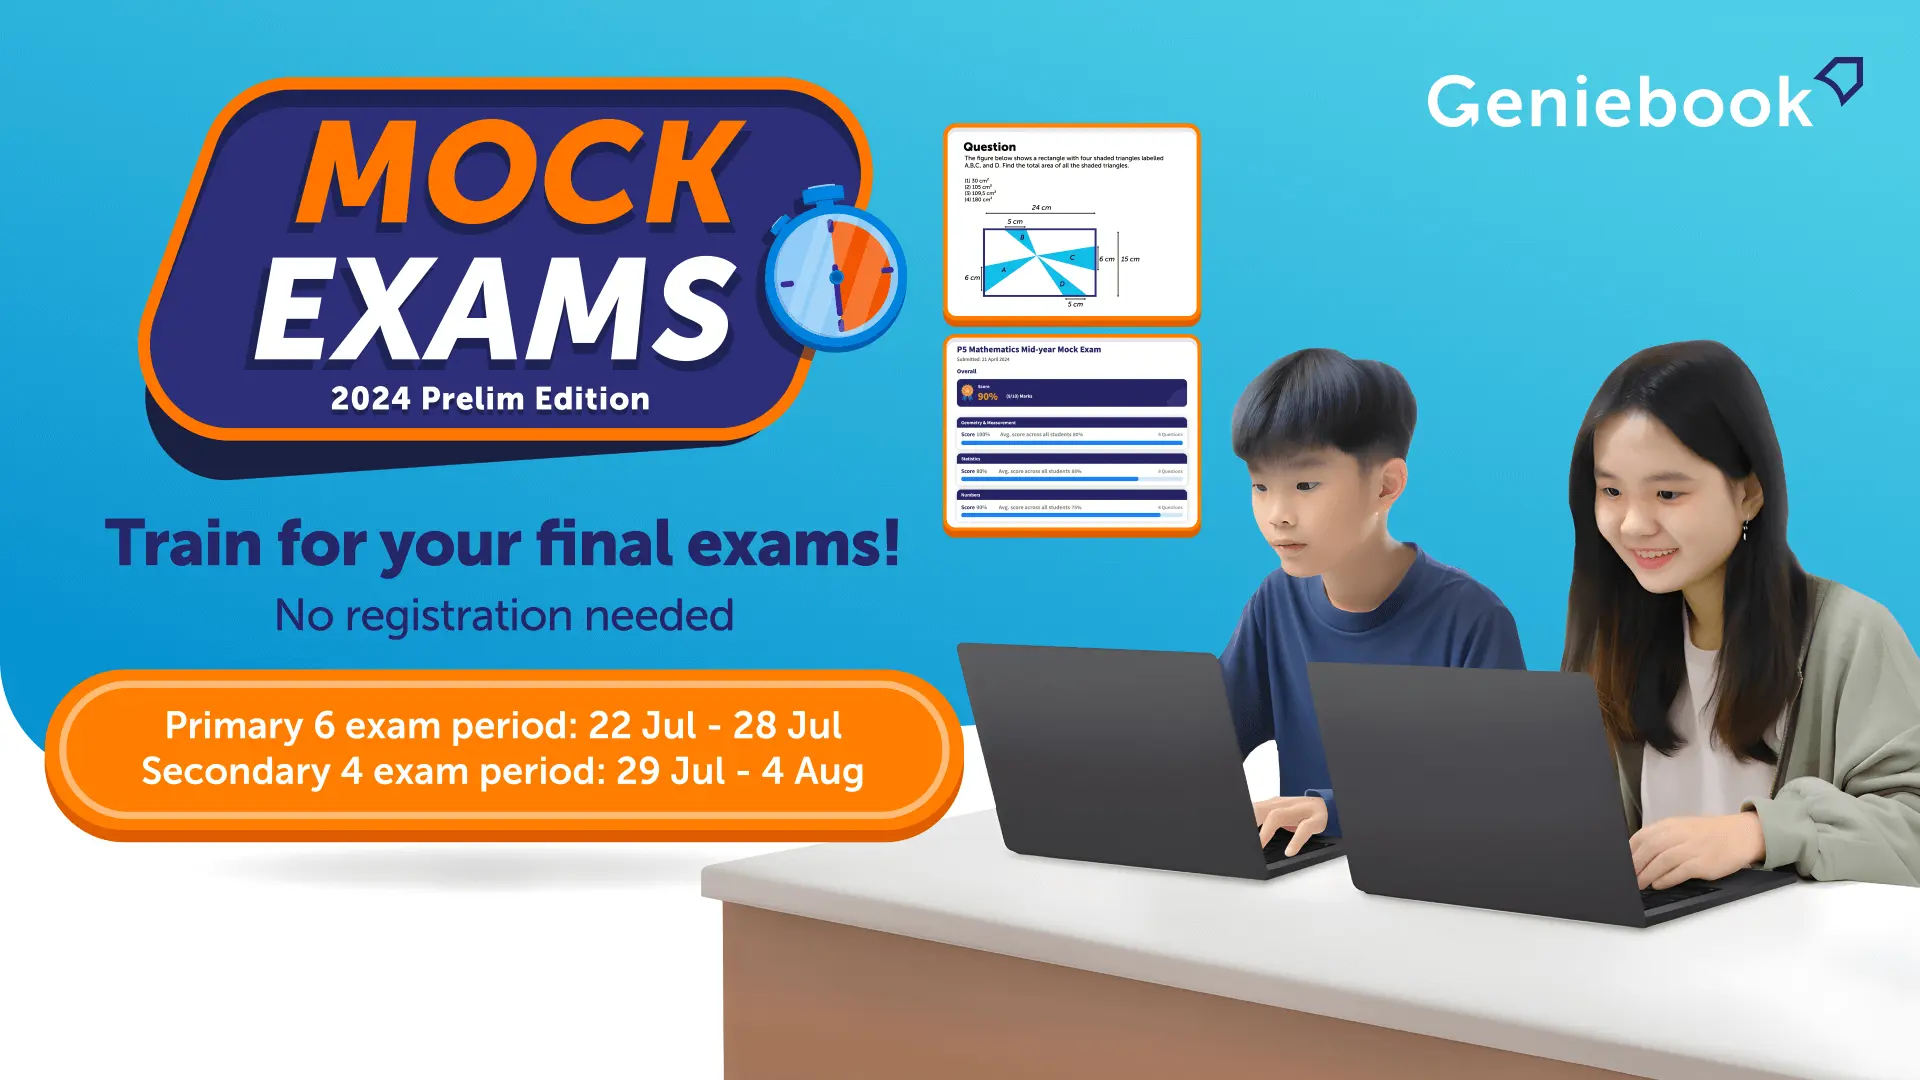 Train up with the Mock Exams 2024 Prelim Edition!